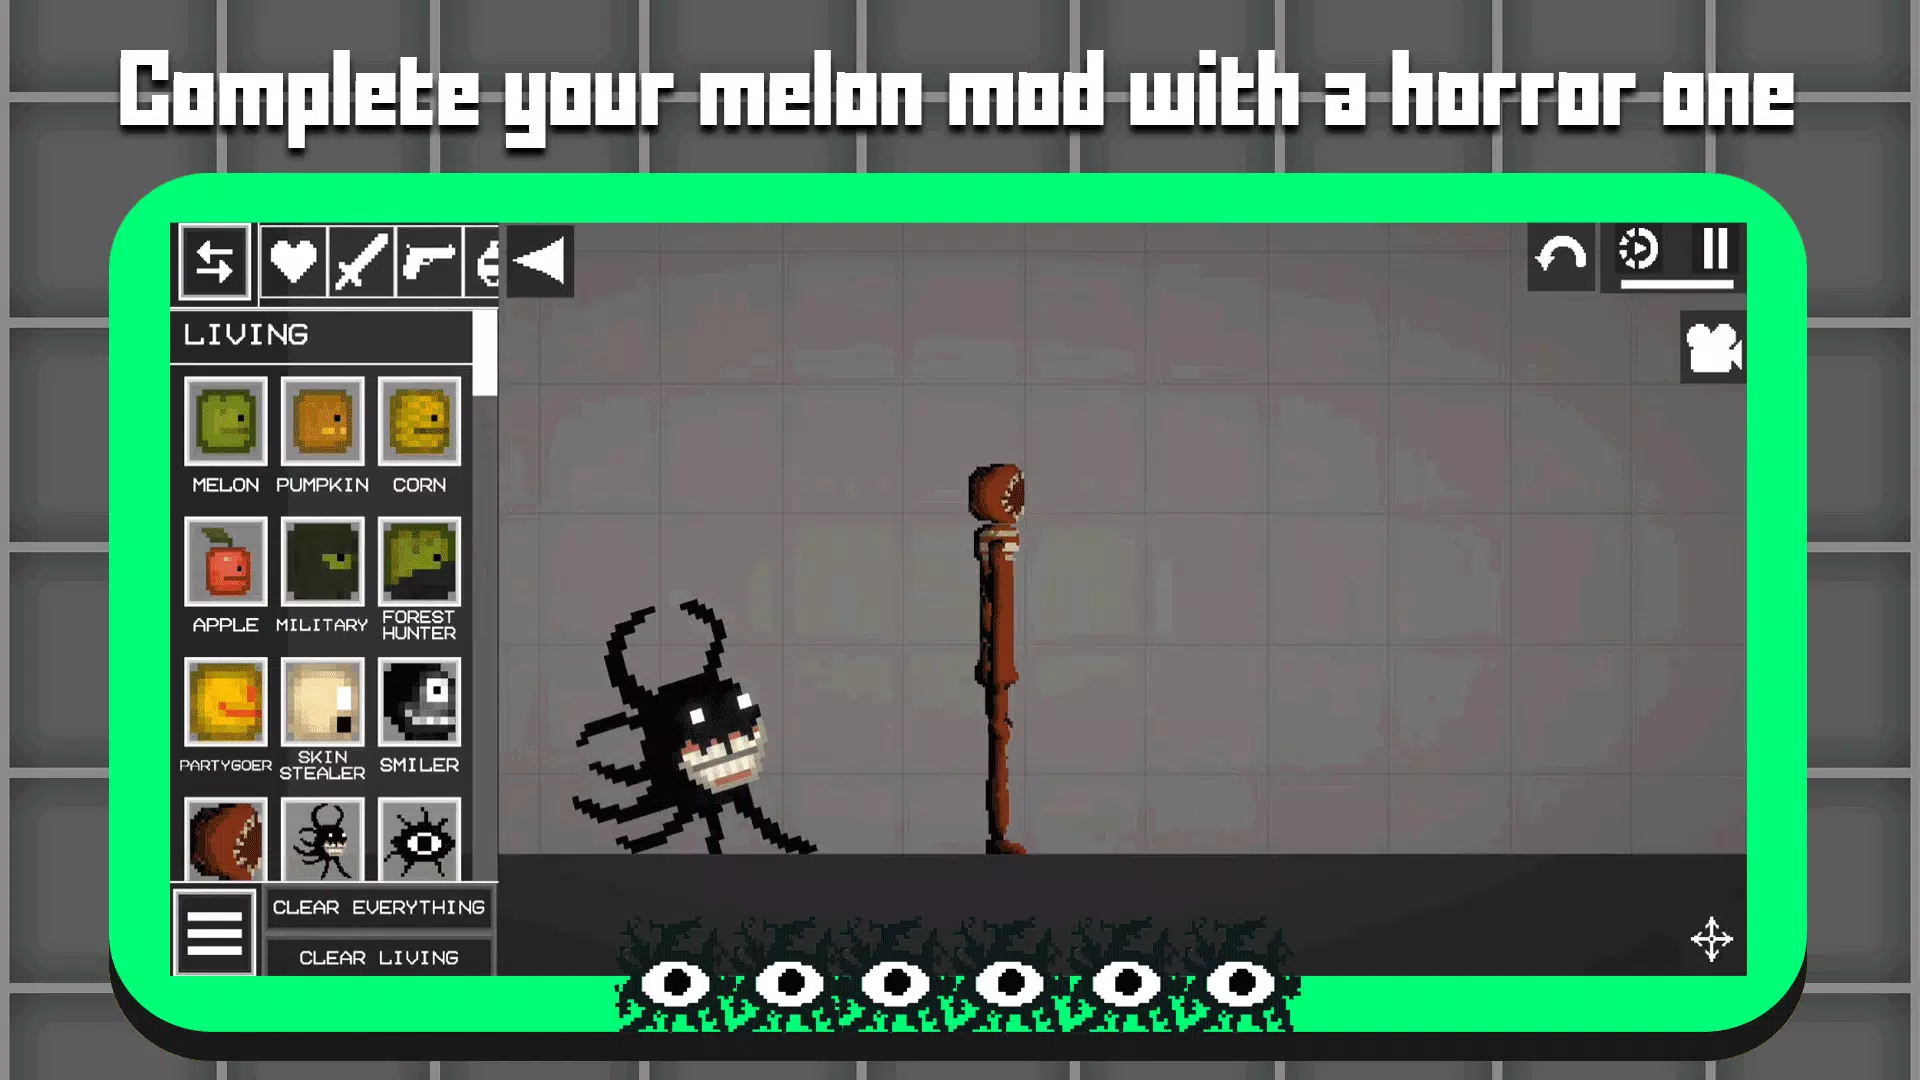 Doors mod for melon playground APK for Android Download